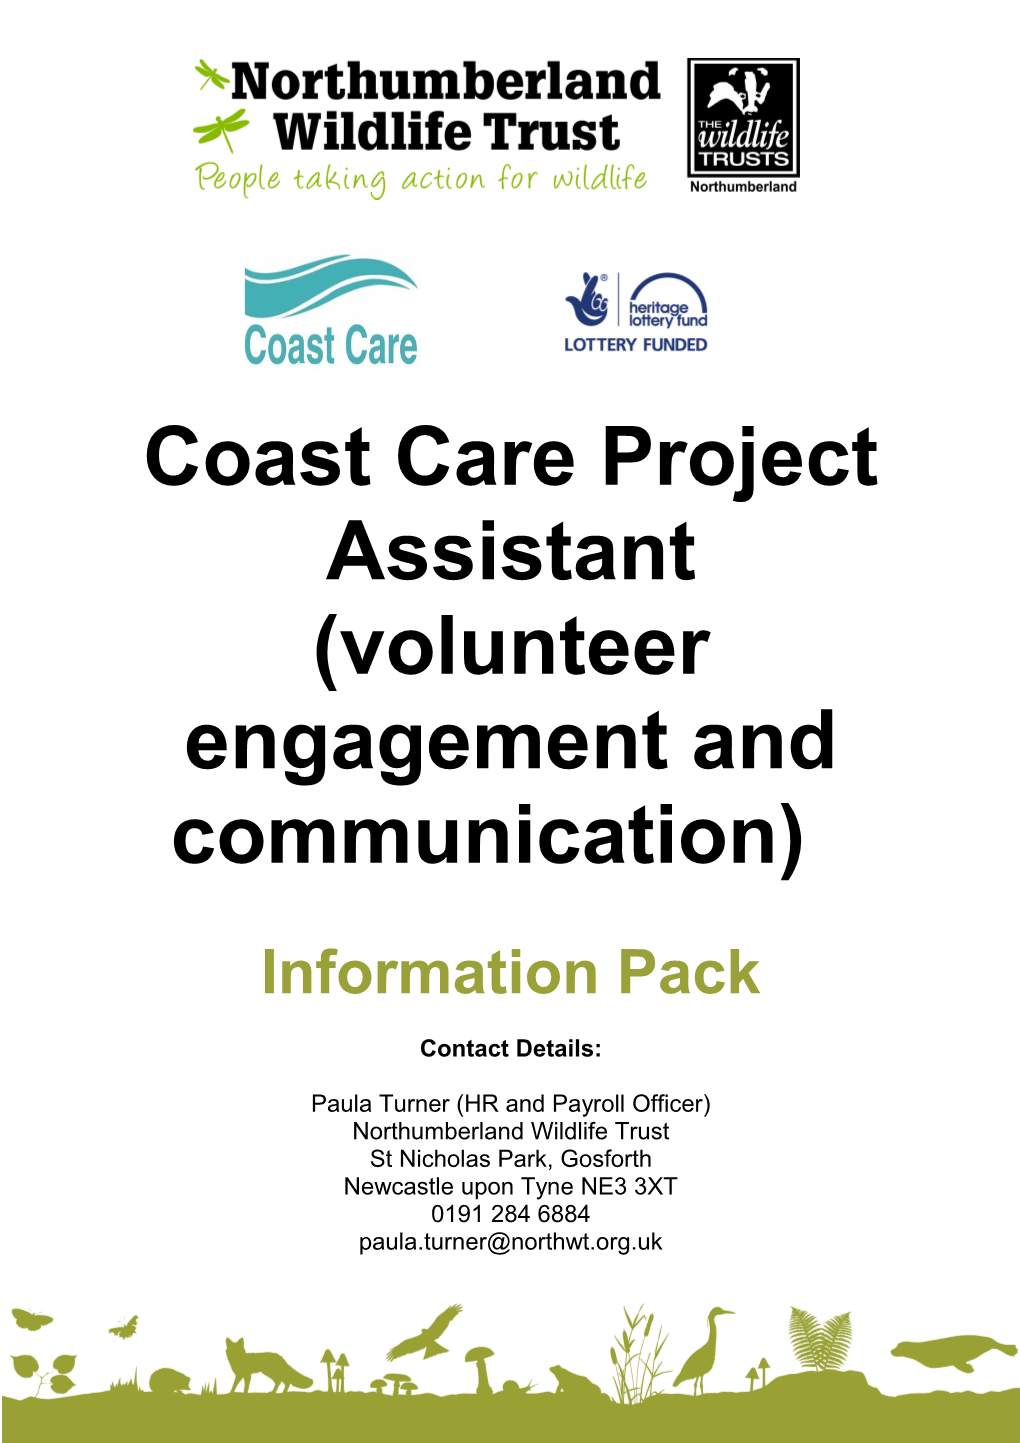 Coast Care Project Assistant (Volunteer Engagement and Communication)